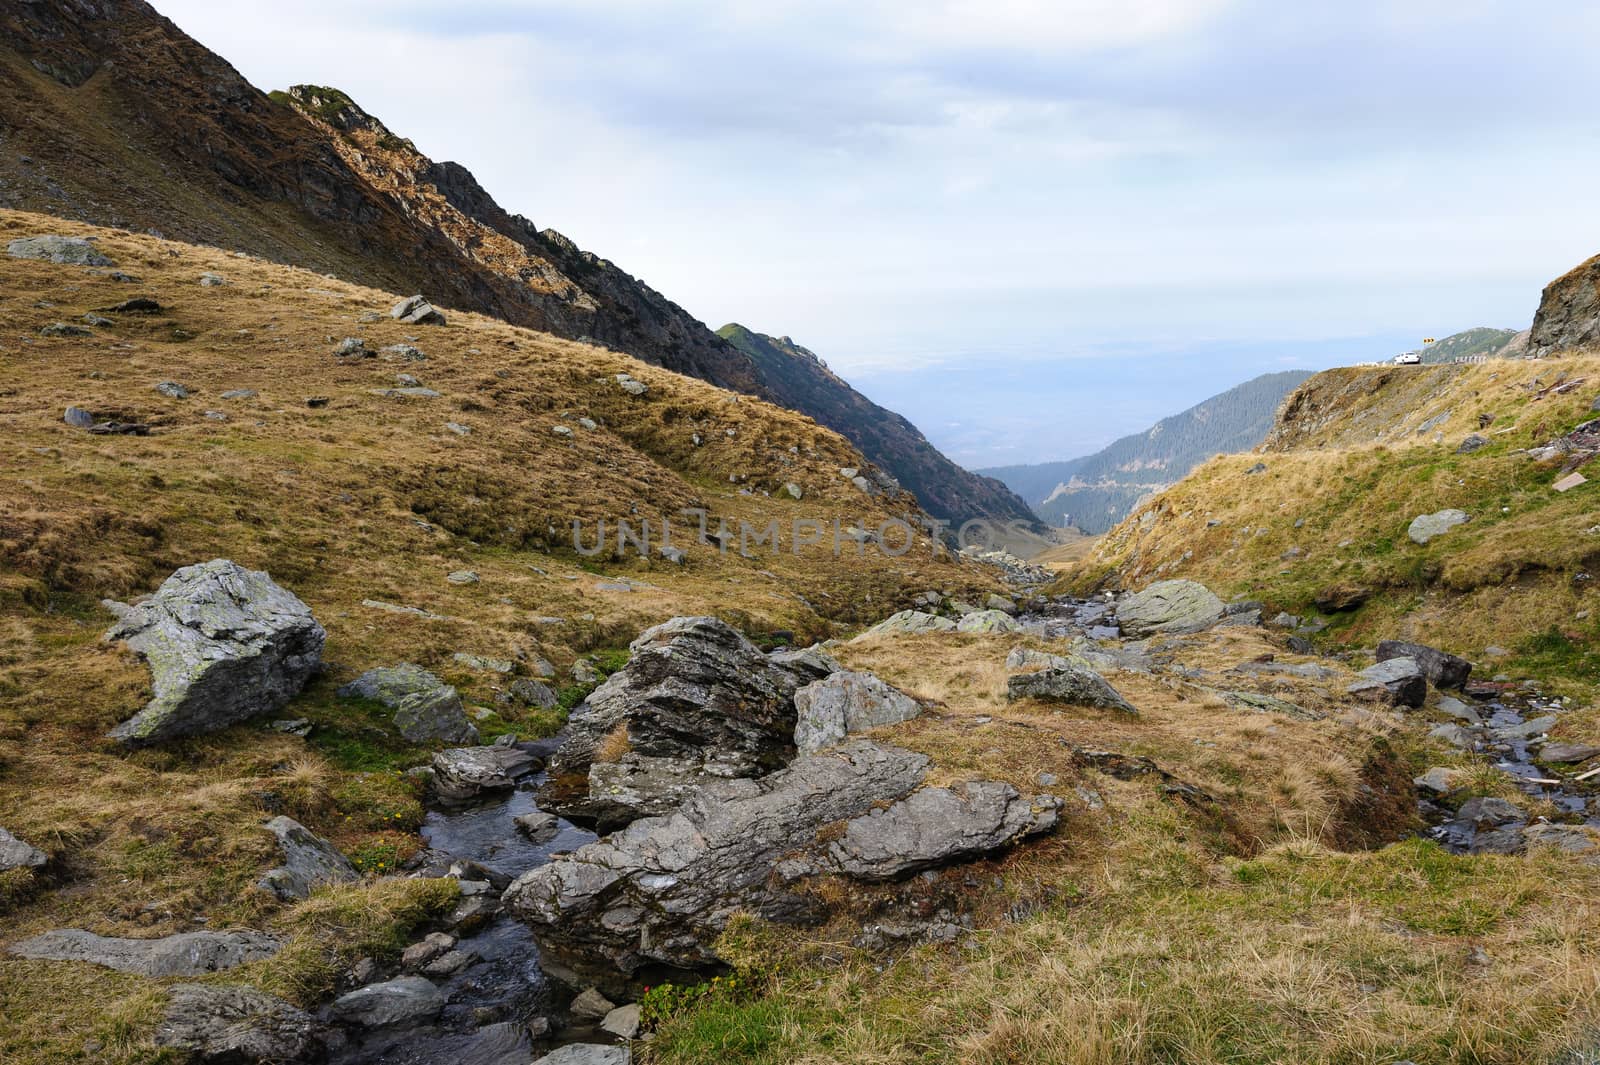 View from Transfagarasan road down to valley. It is a paved mountain road crossing the southern section of the Carpathian Mountains of Romania. It has national-road ranking and is the second-highest paved road in the country after the Transalpina.